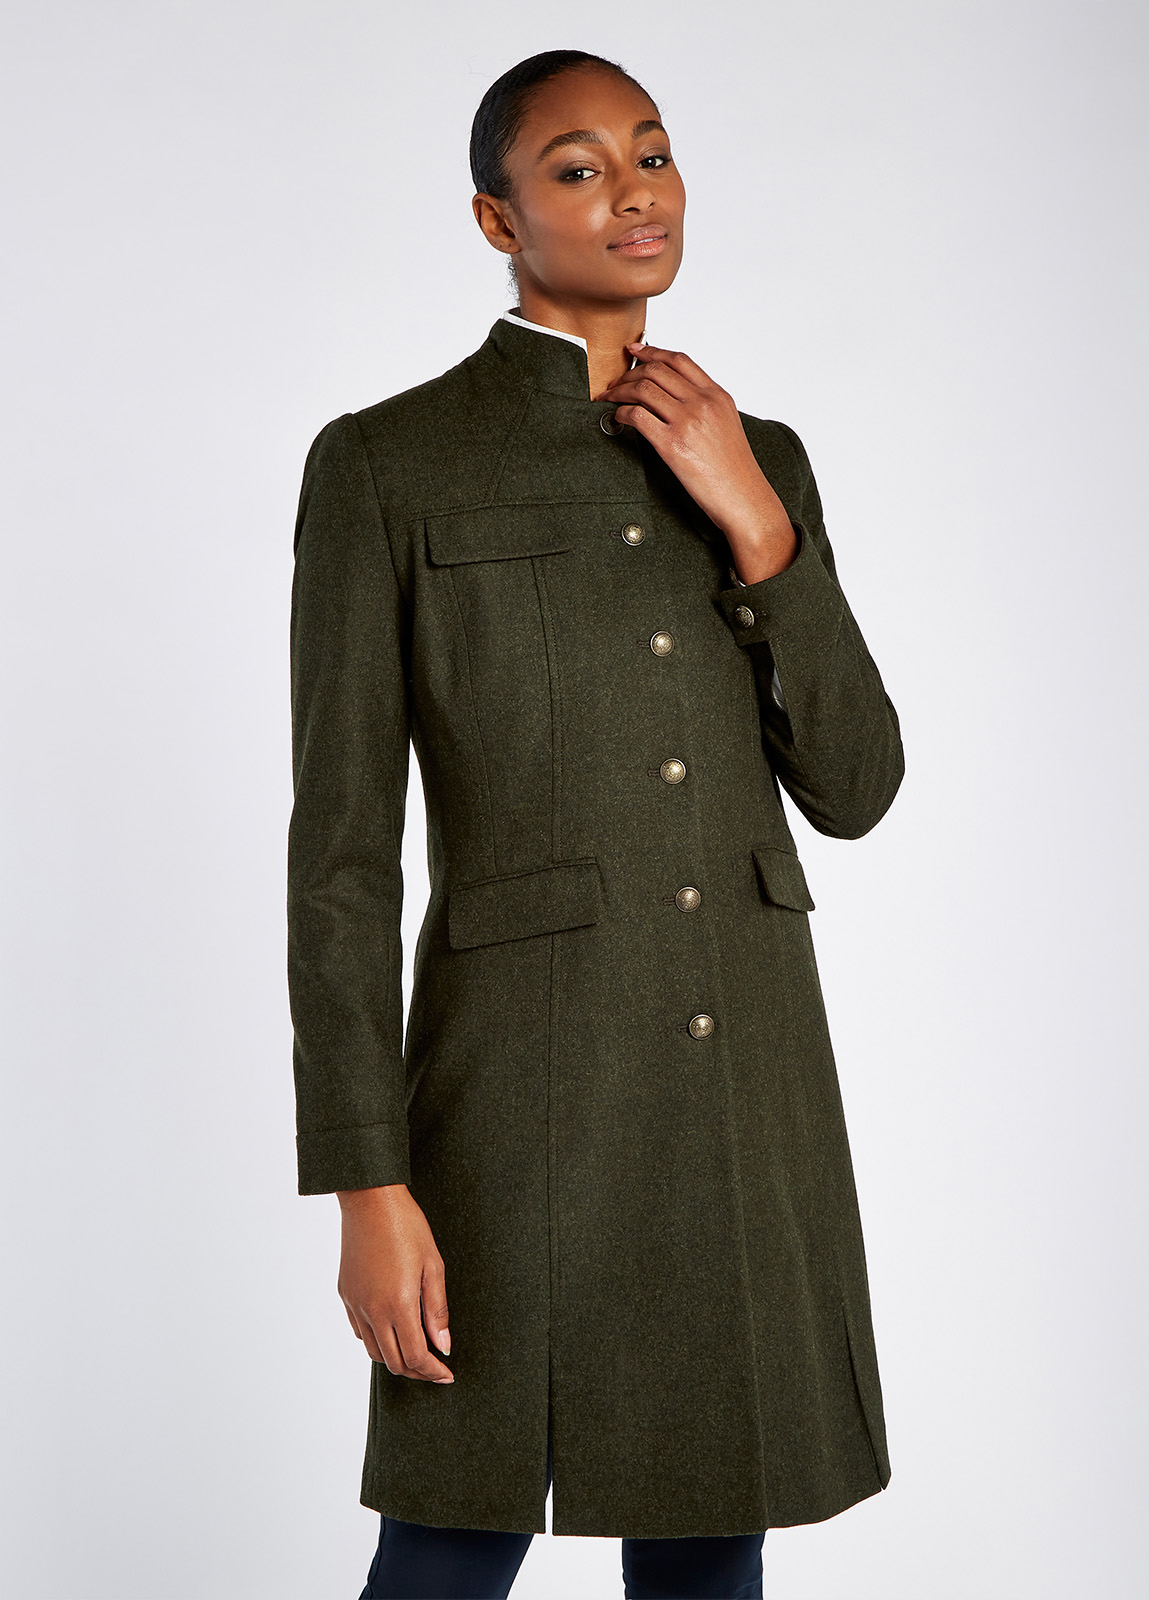 A woman modelling Dubarry women's Coolepark Tweed Loden Coat. A coat with a mandarin collar, four pocket flaps and button front style.